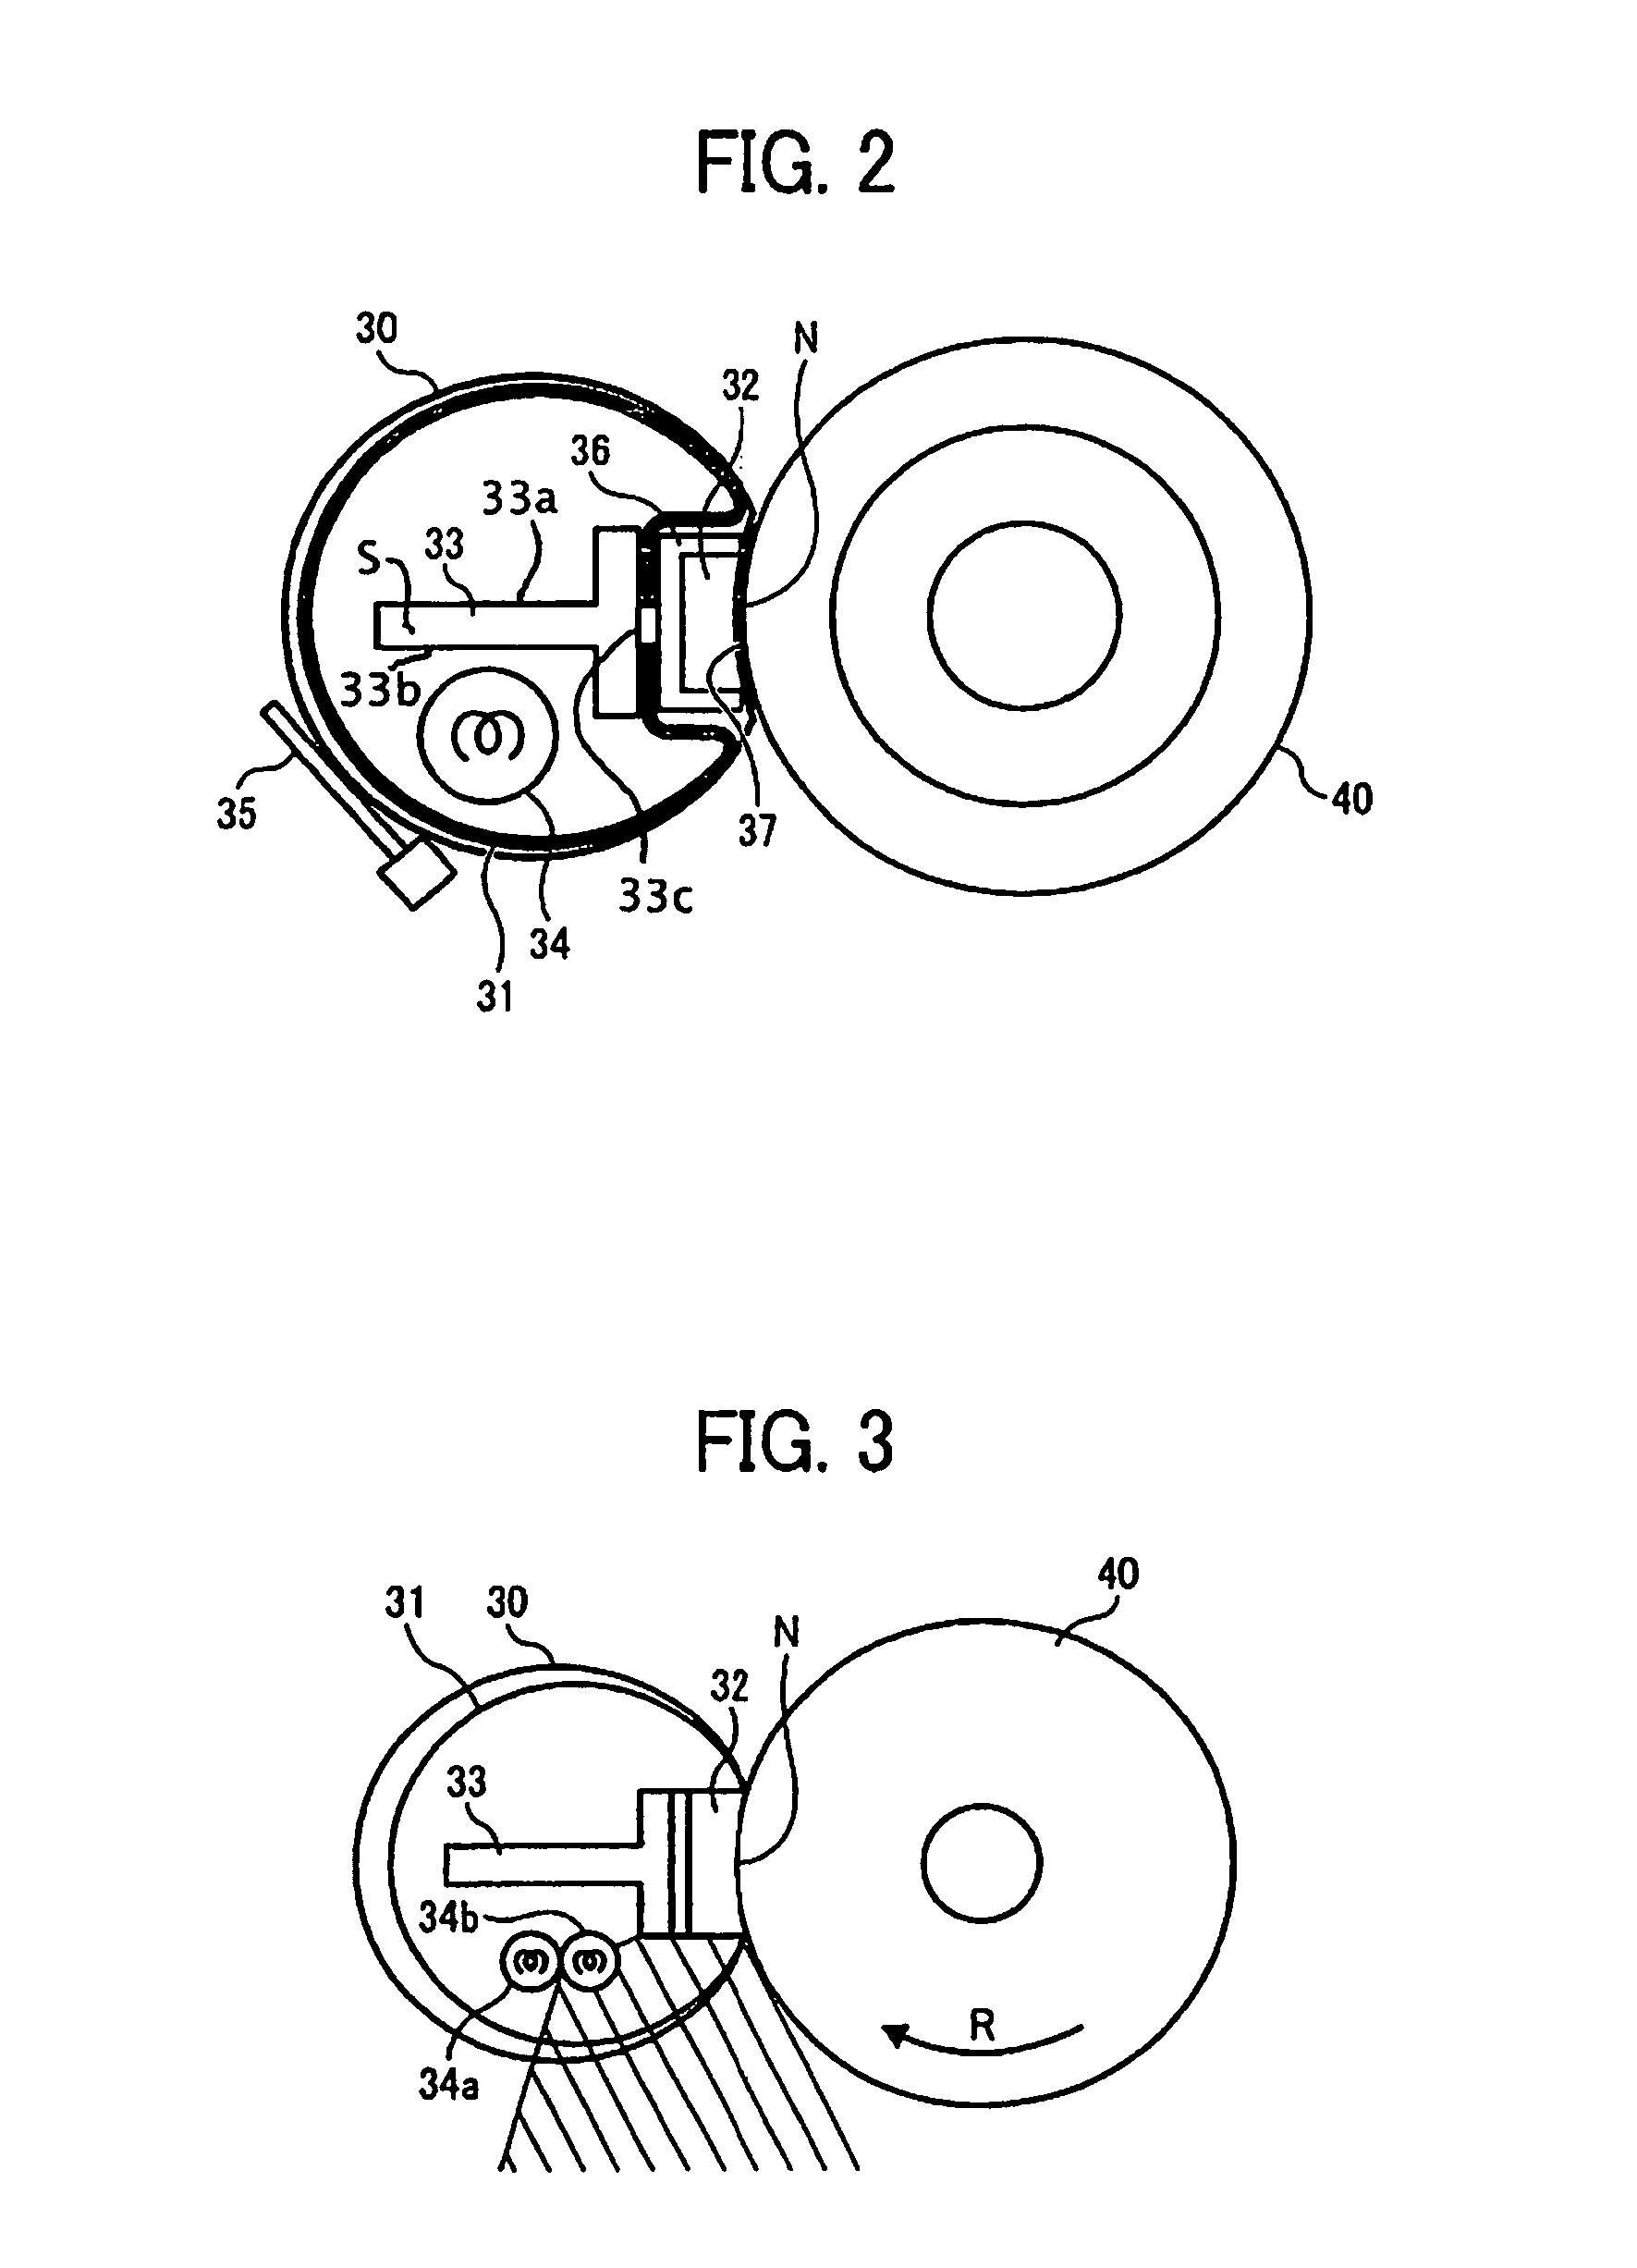 Fixing device having a plurality of heat sources and a plurality of temperature detectors and image forming apparatus including same